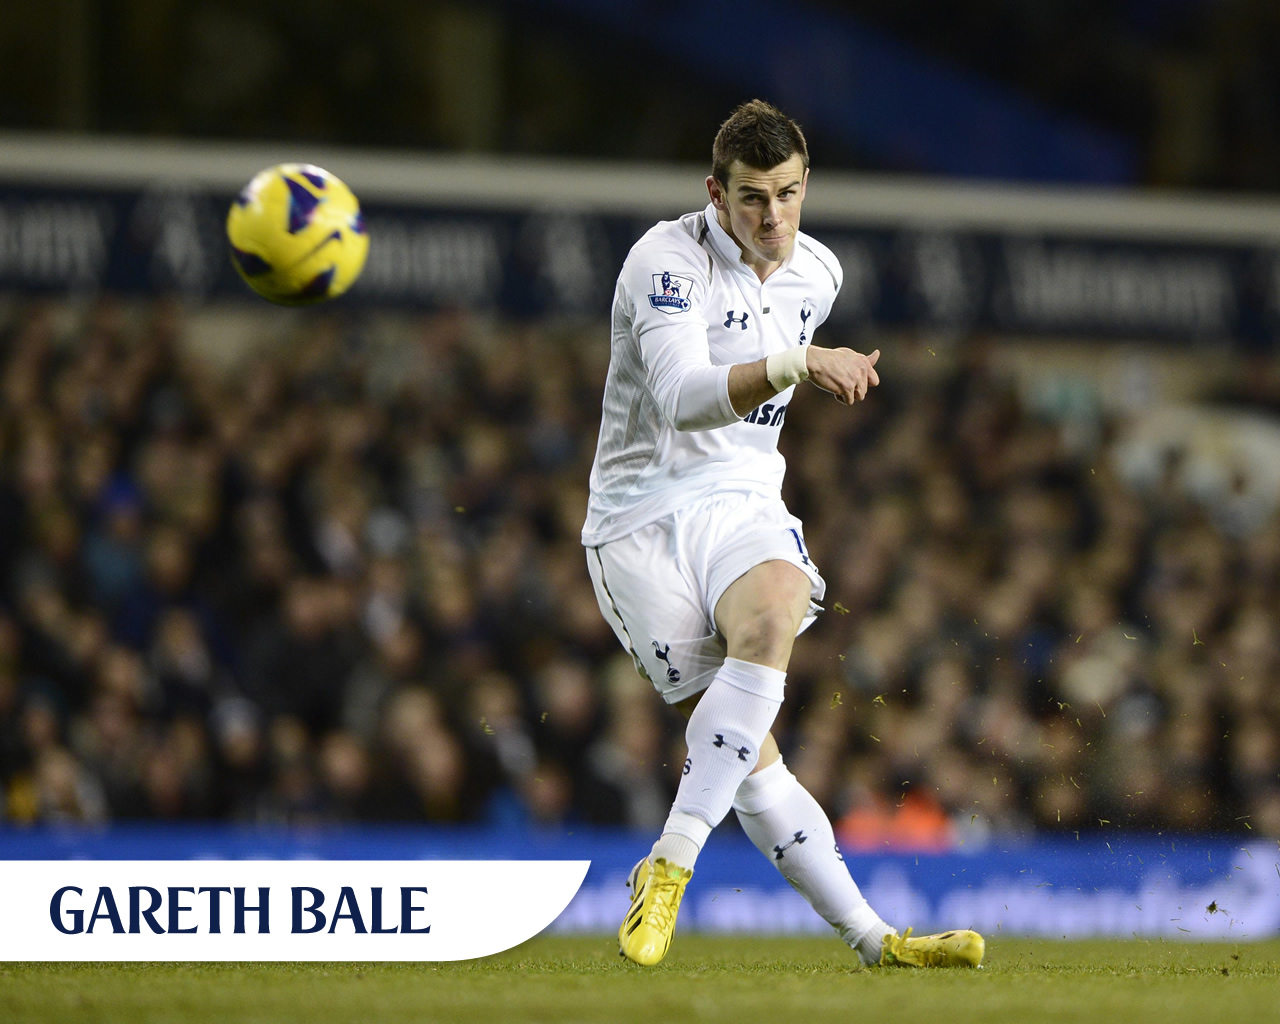 Gareth Bale Signs A 100m Euro Contract With Real Madrid Mj1982m S